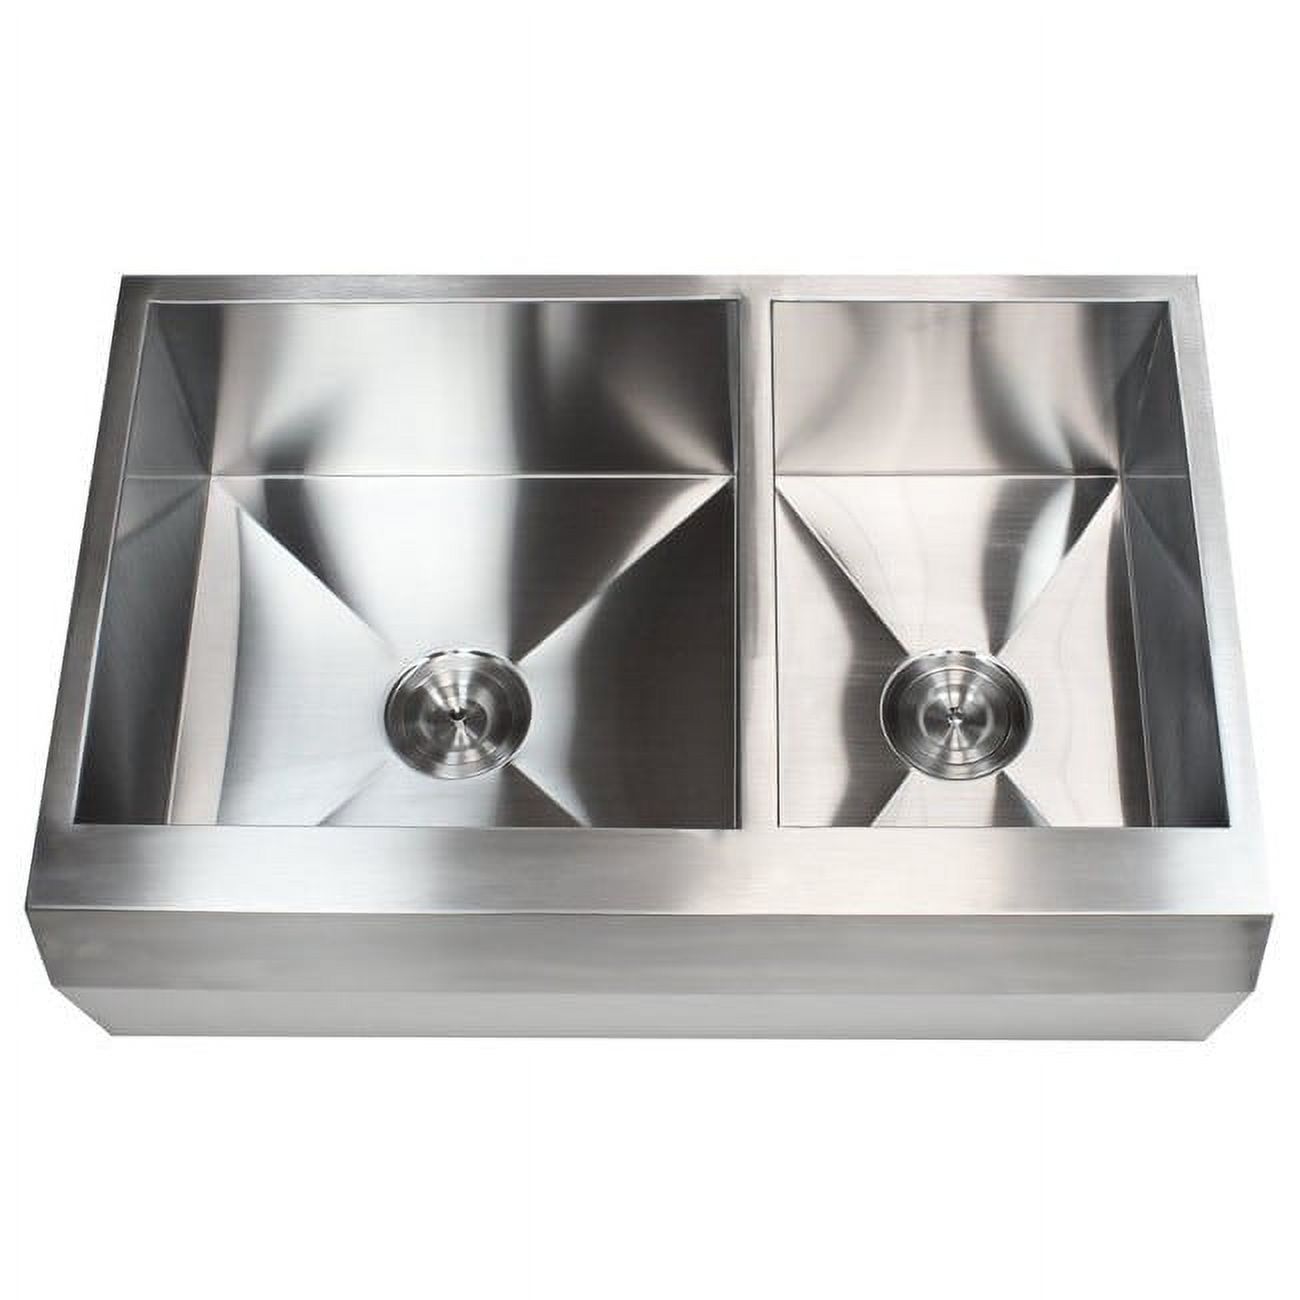 Contempo Living  33 in. Double Bowl 60 by 40 Zero Radius Well Angled Farm Apron Kitchen Sink - Stainless Steel - 16 Gauge - image 3 of 5